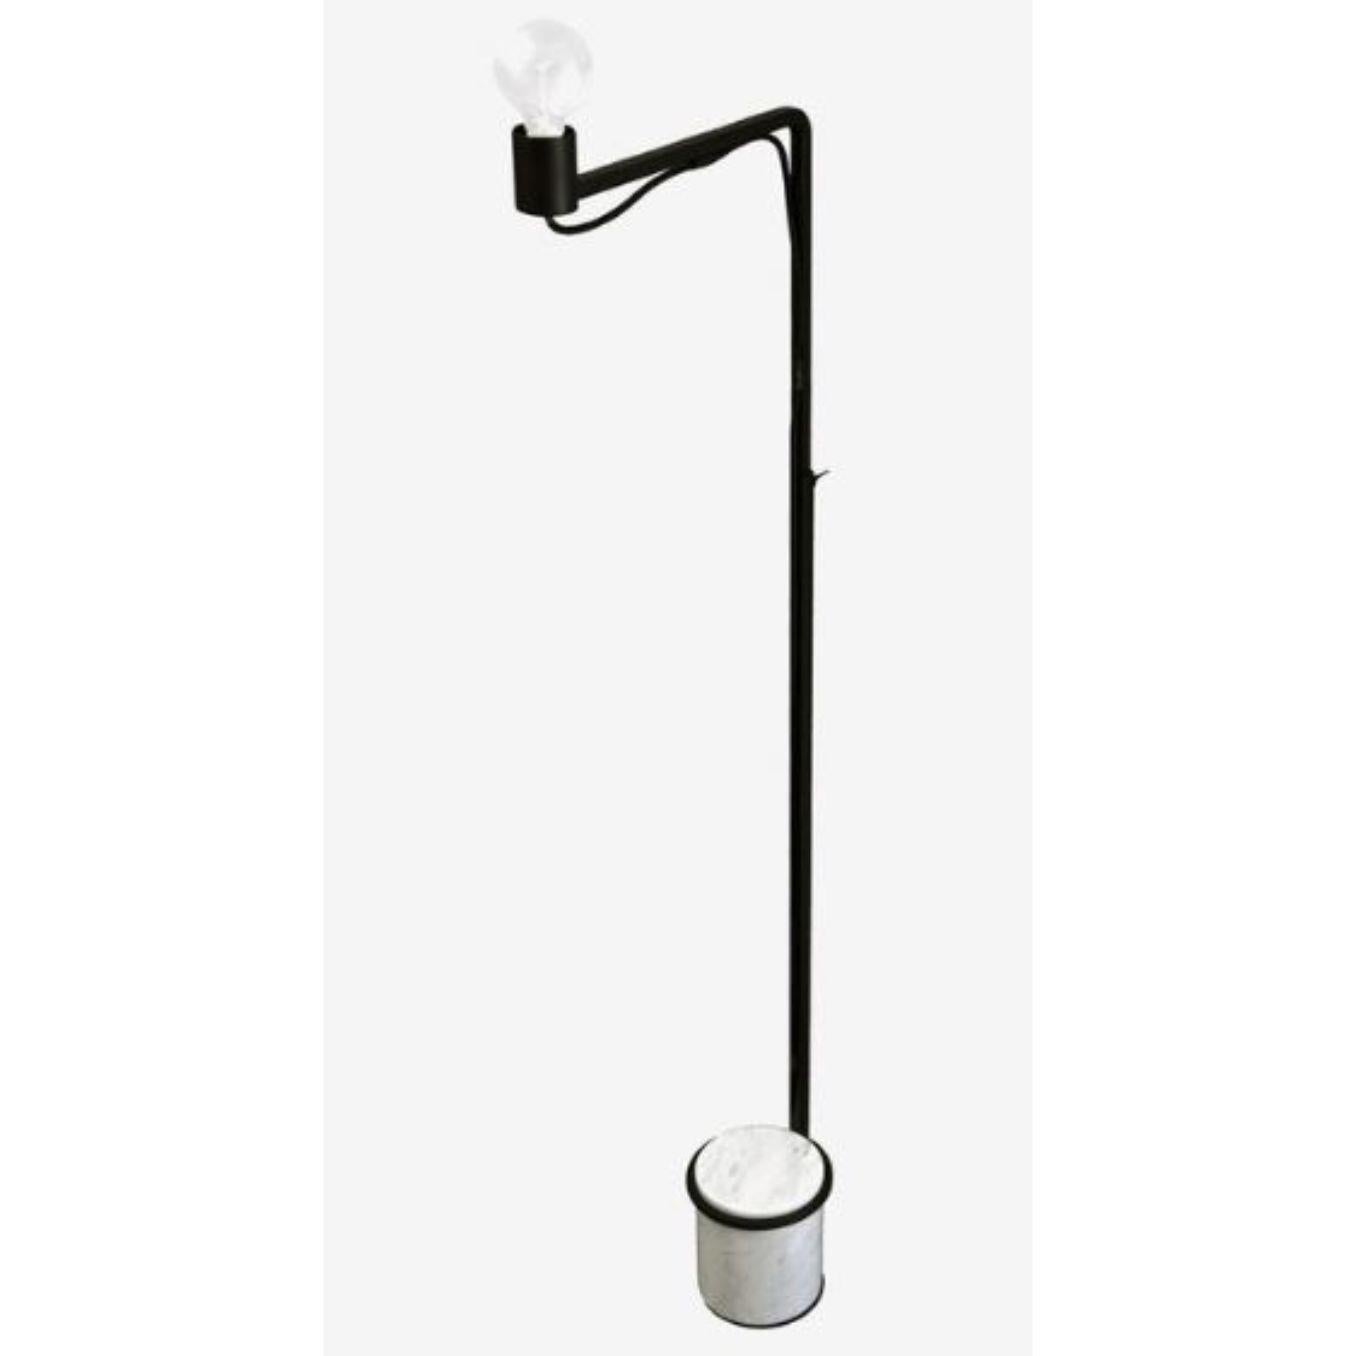 Lest floor lamp by RADAR
Design: Bastien Taillard
Materials: Metal, fabric, Carrara marble.
Dimensions: W 40 x D 17.5 x H 115-175 cm

All our lamps can be wired according to each country. If sold to the USA it will be wired for the USA for